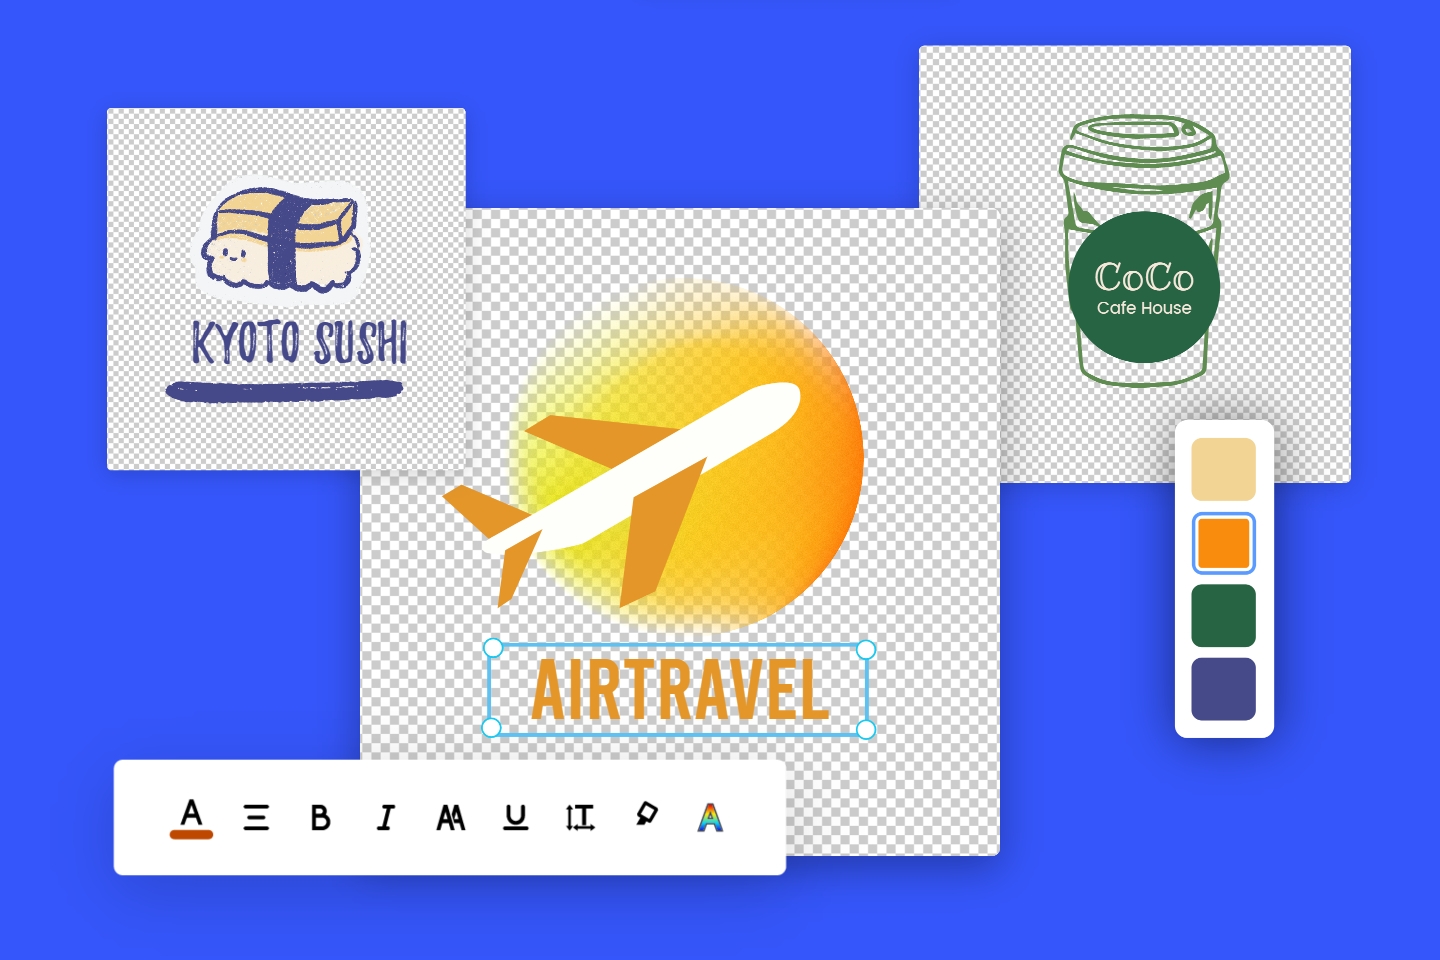 Make png logos with transparent backgrounds using fotor